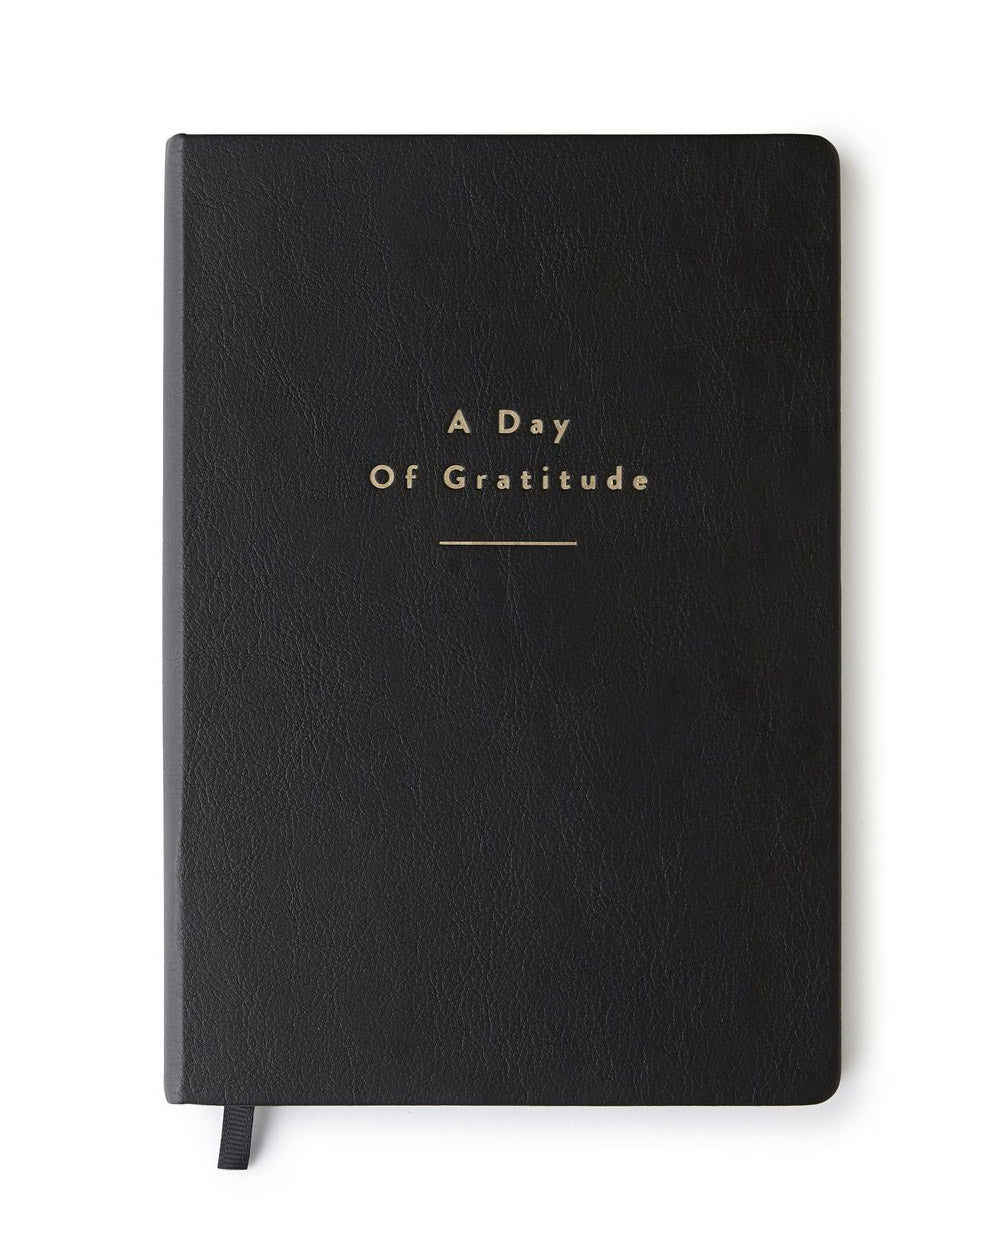 A Day of Gratitude Journal